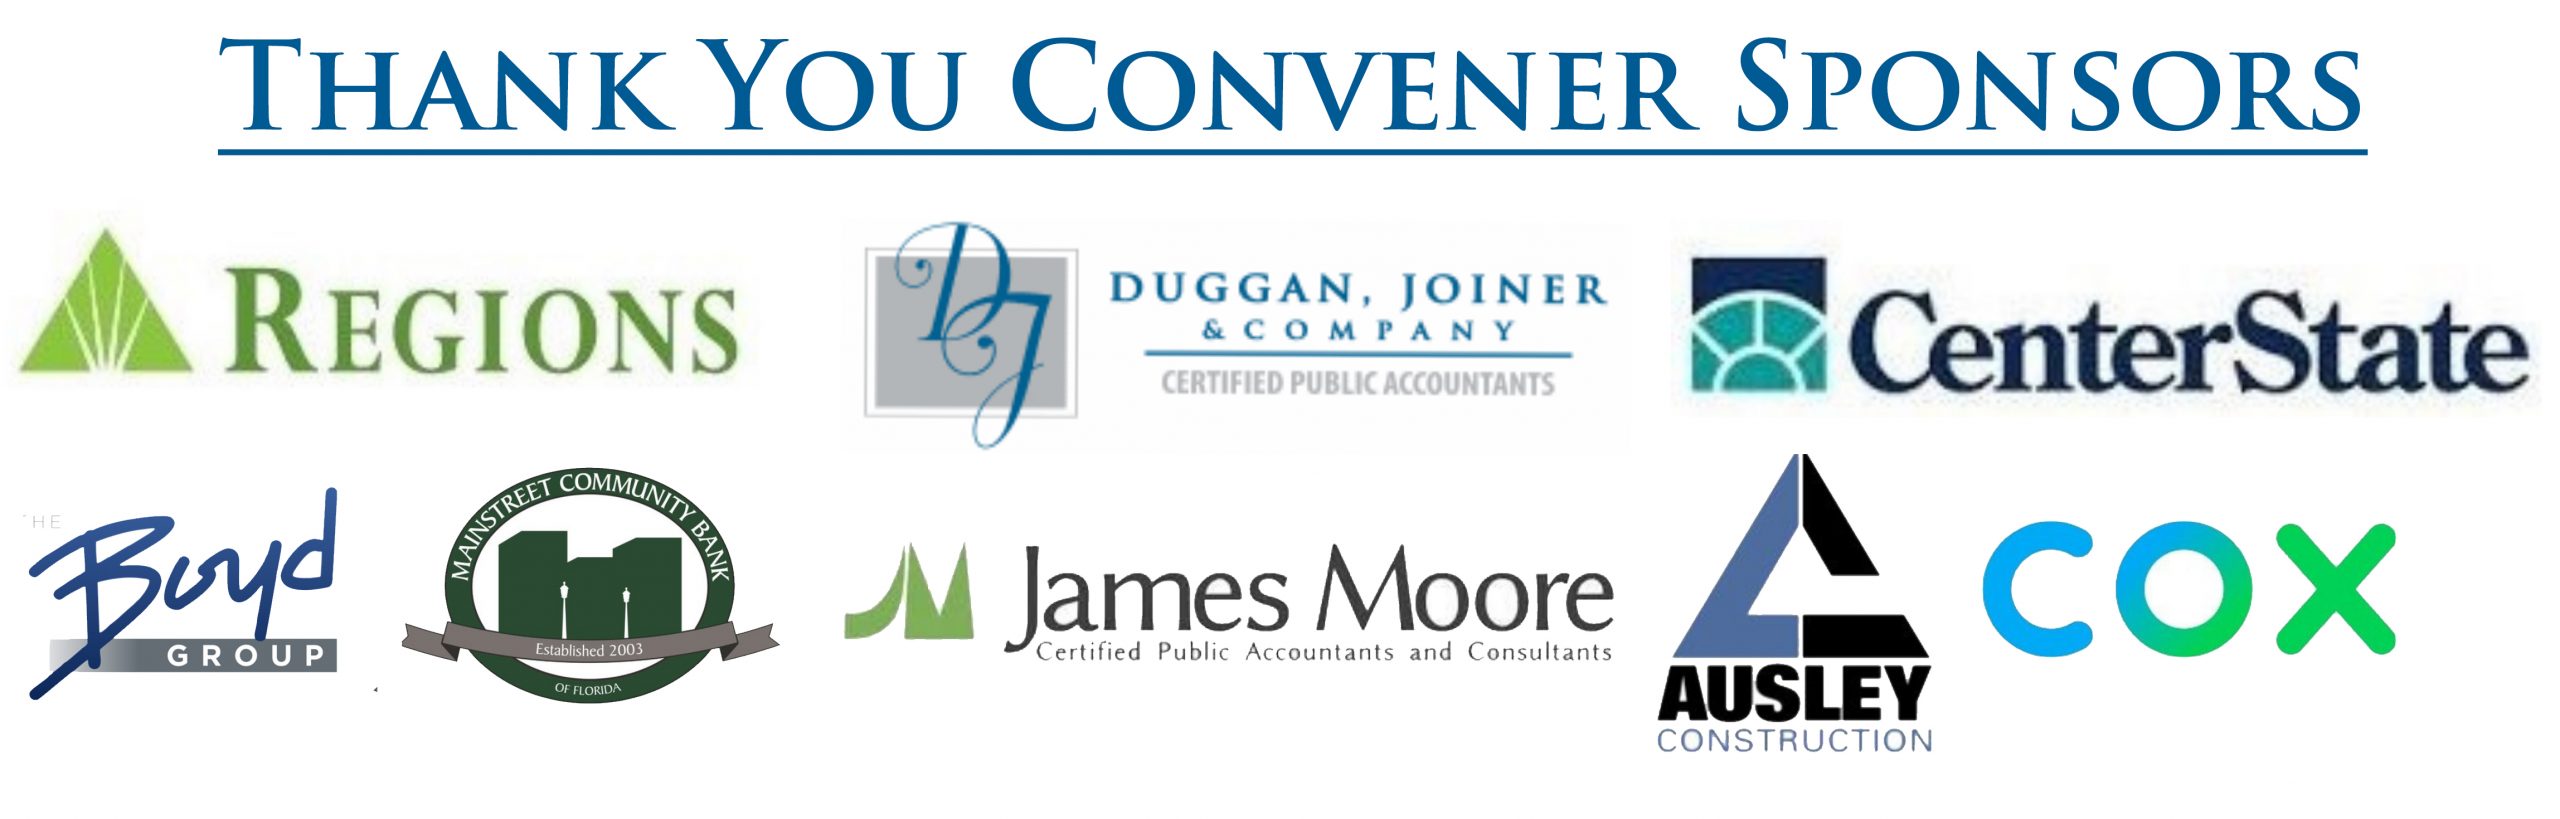 Regions Bank + Duggan, Joiner & Company + CenterState Bank + Boyd Group + Mainstreet Community Bank + James Moore + Ausley Construction + Cox Communications